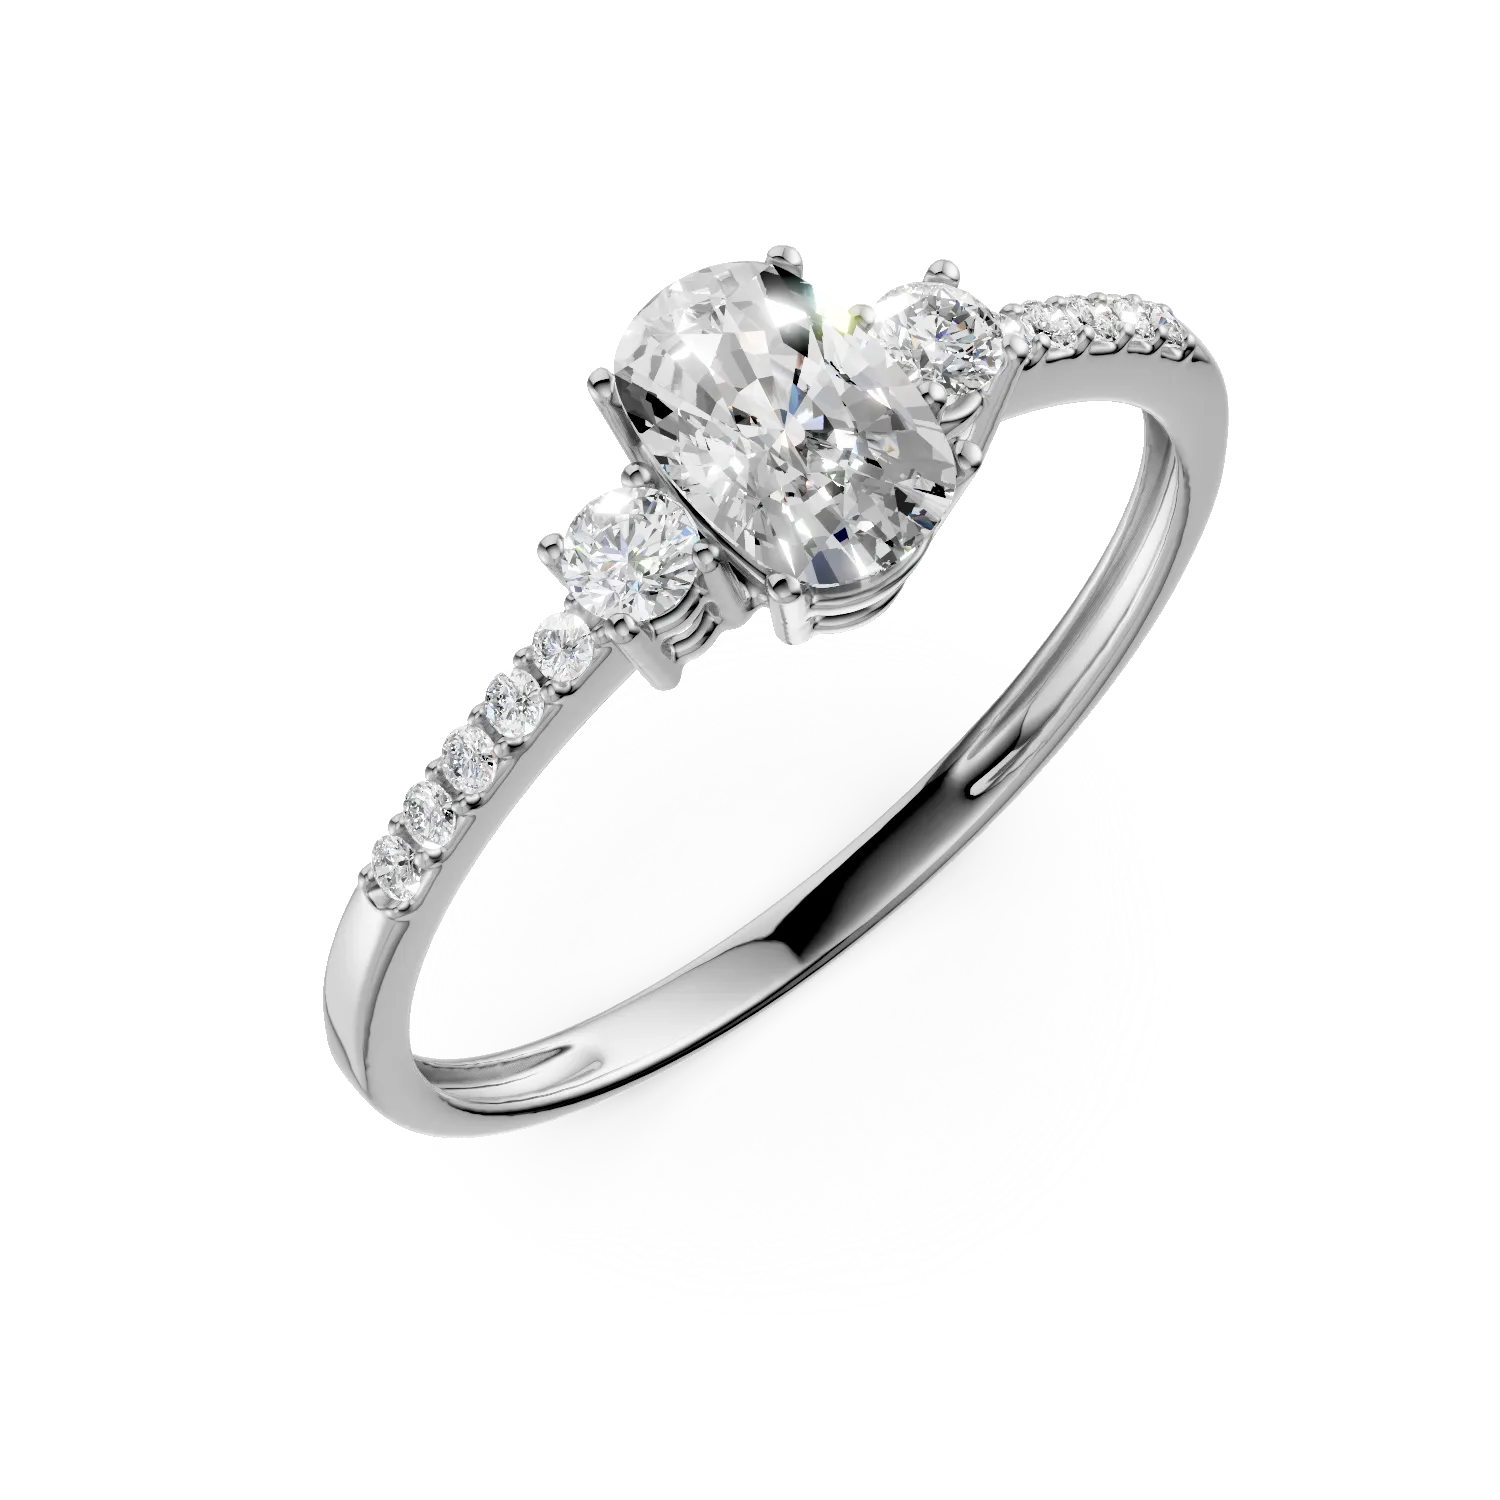 White gold engagement ring with microsetting zirconia